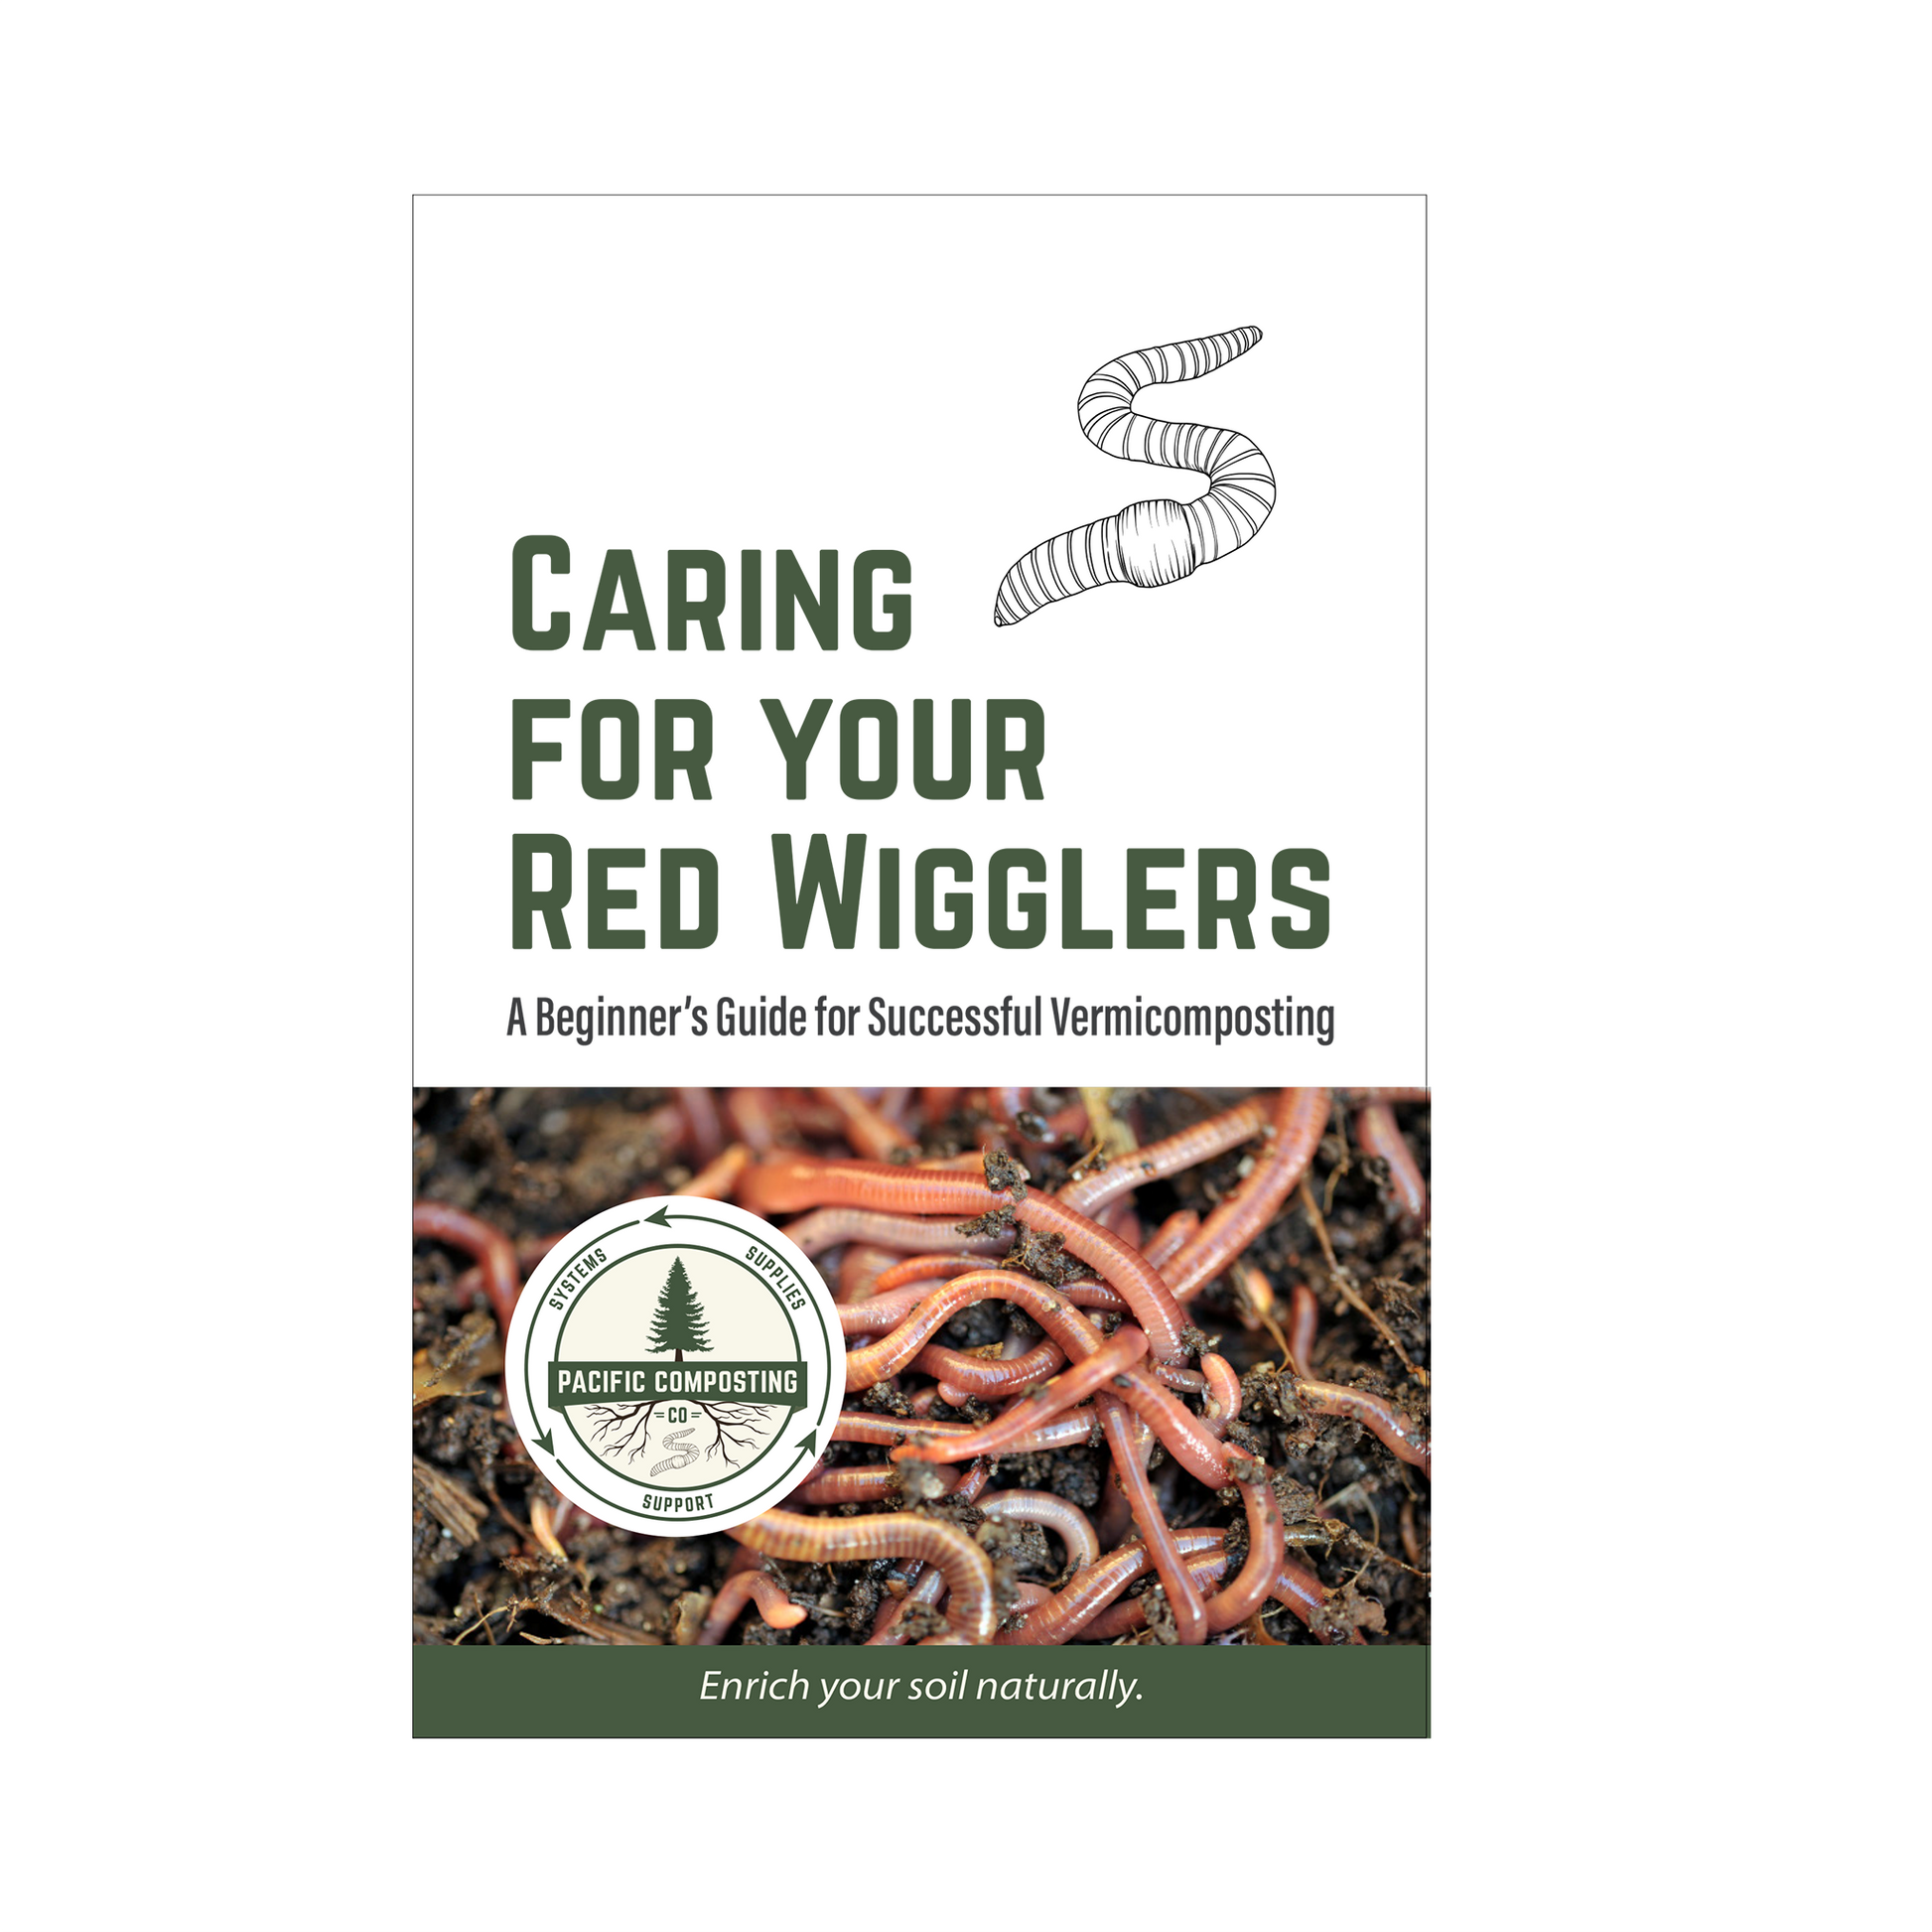 Red wiggler Composting Worms for Sale in Canada. Best for Worm